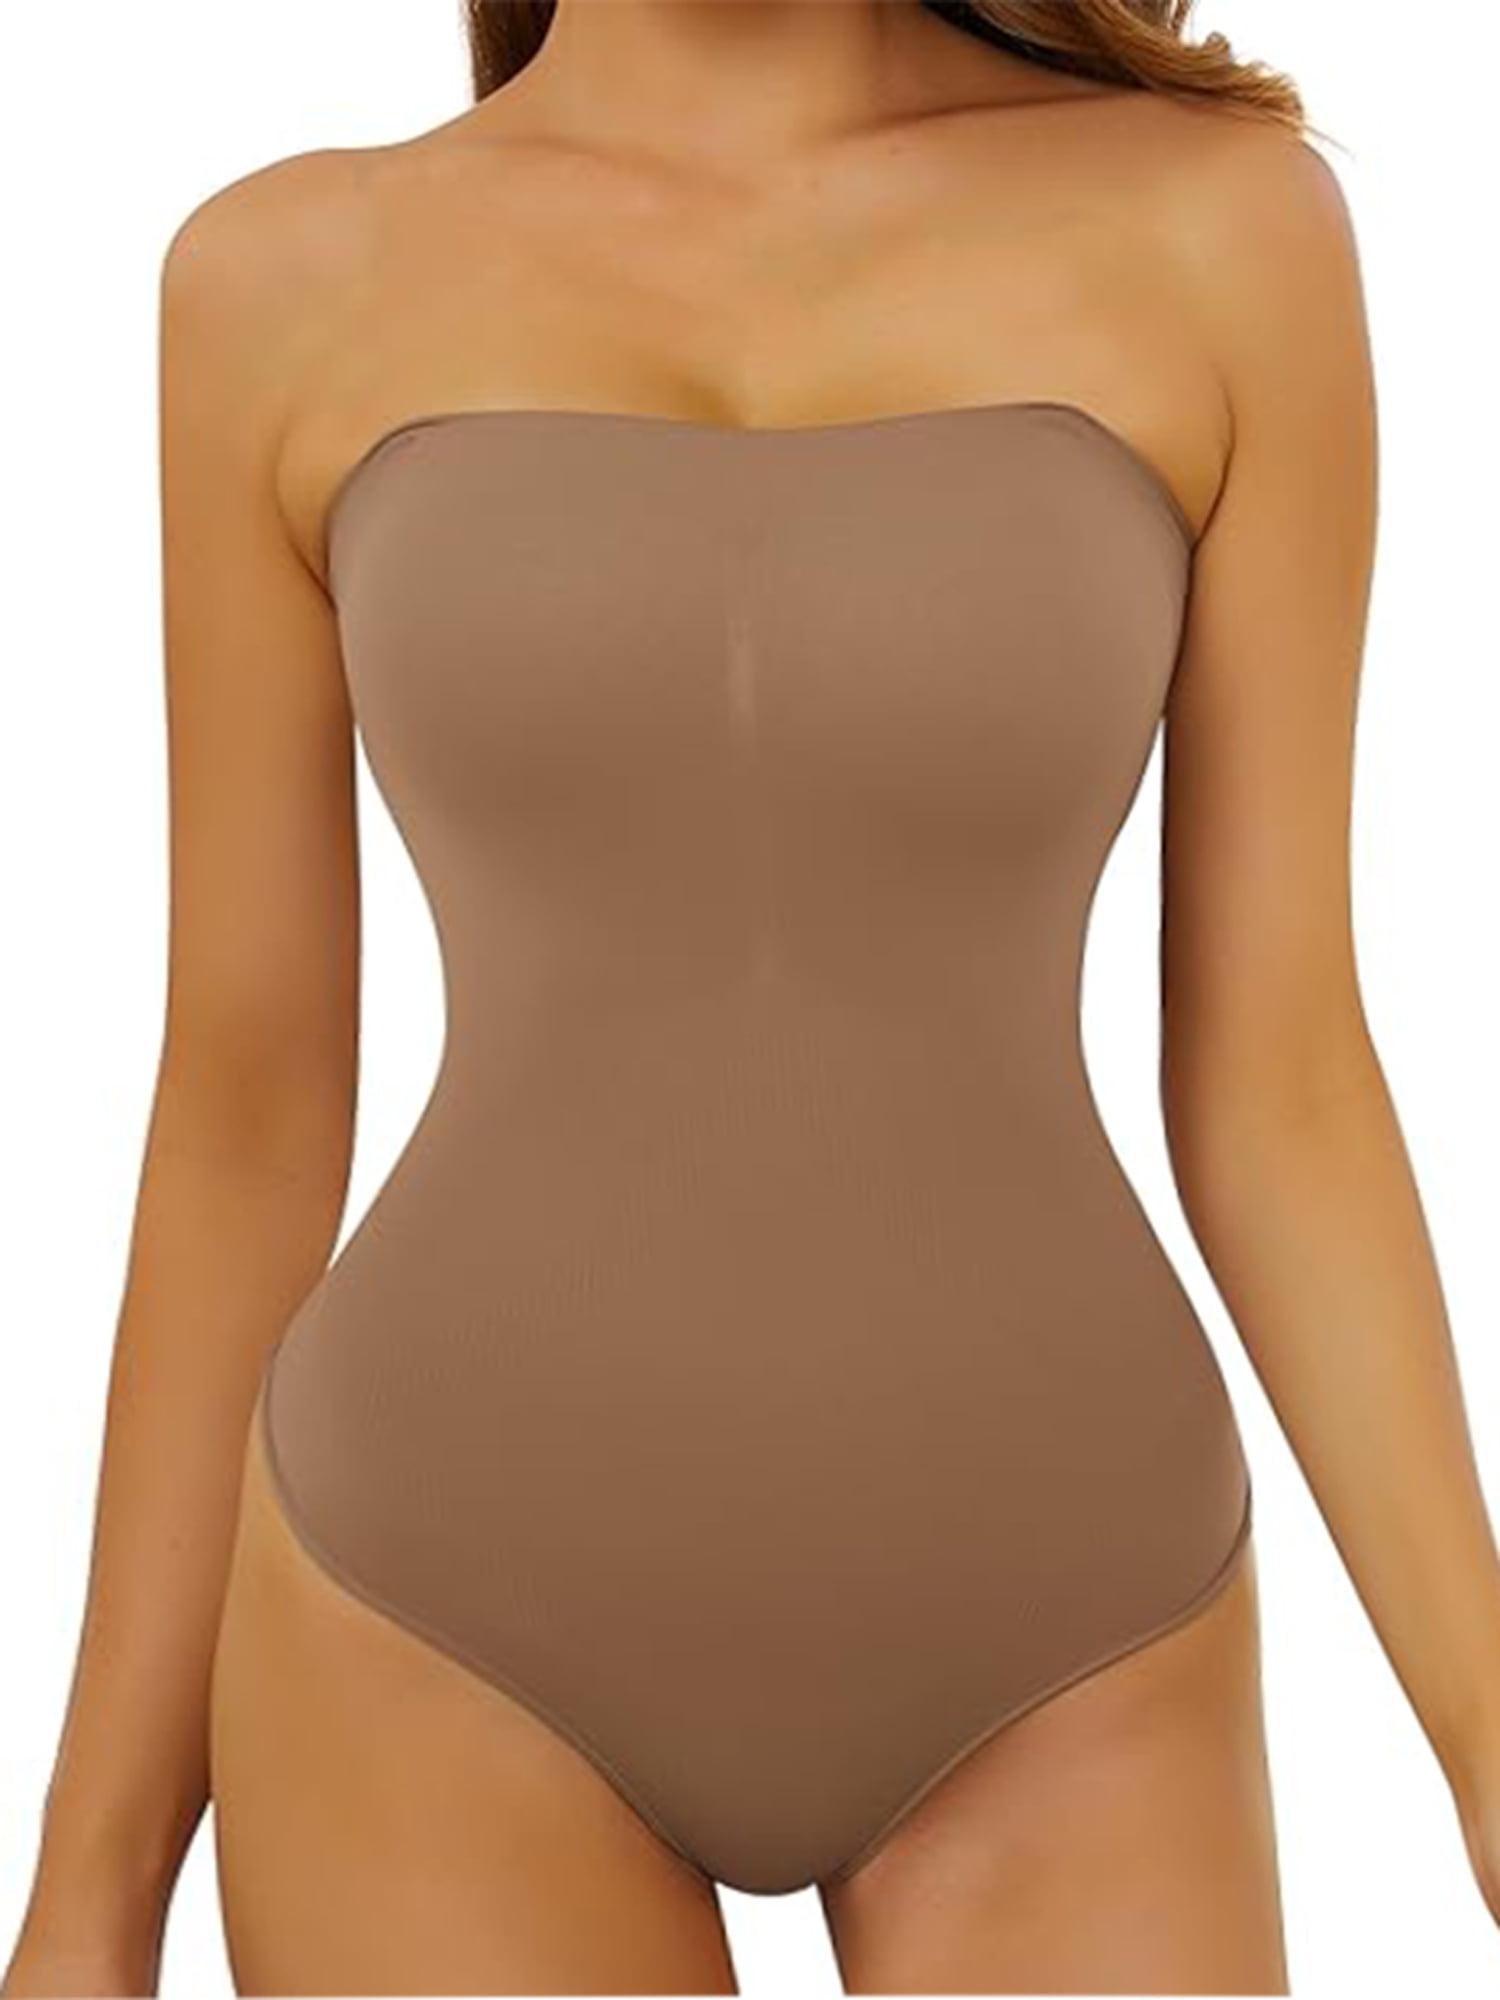 Camisole Bodysuit for Women Tummy Control Slimming Shapewear Butt Lifter  Seamless Sculpting Thong Body Shaper Tank Tops Corset - Gwendolyn's –  Gwendolyn's